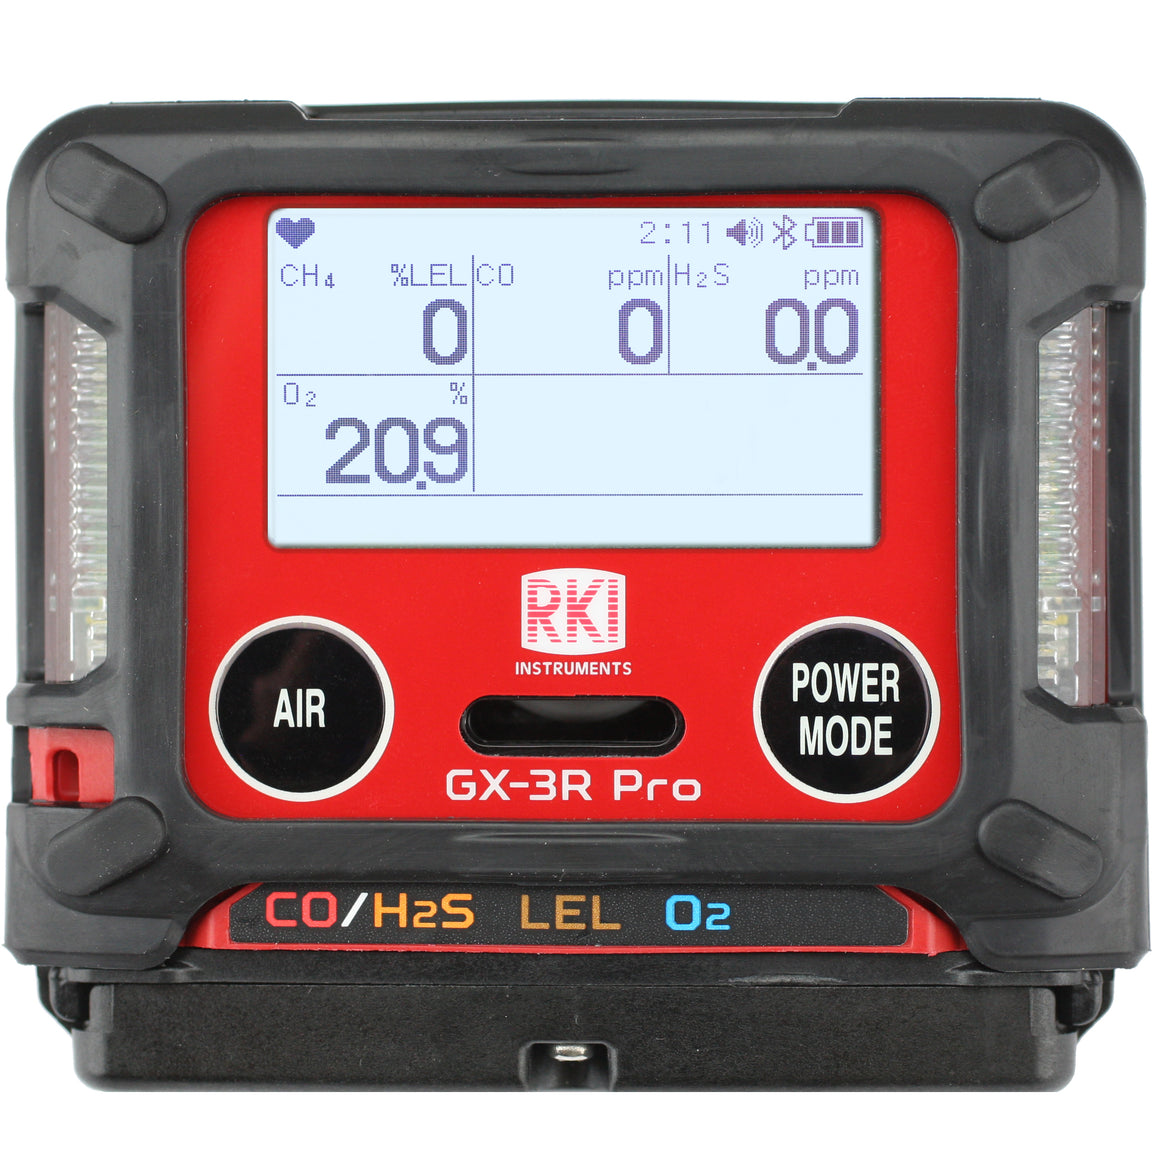 RKI 726-107-05-P2 EAGLE 2, Six Gas Portable Monitor for LEL and PPM ...